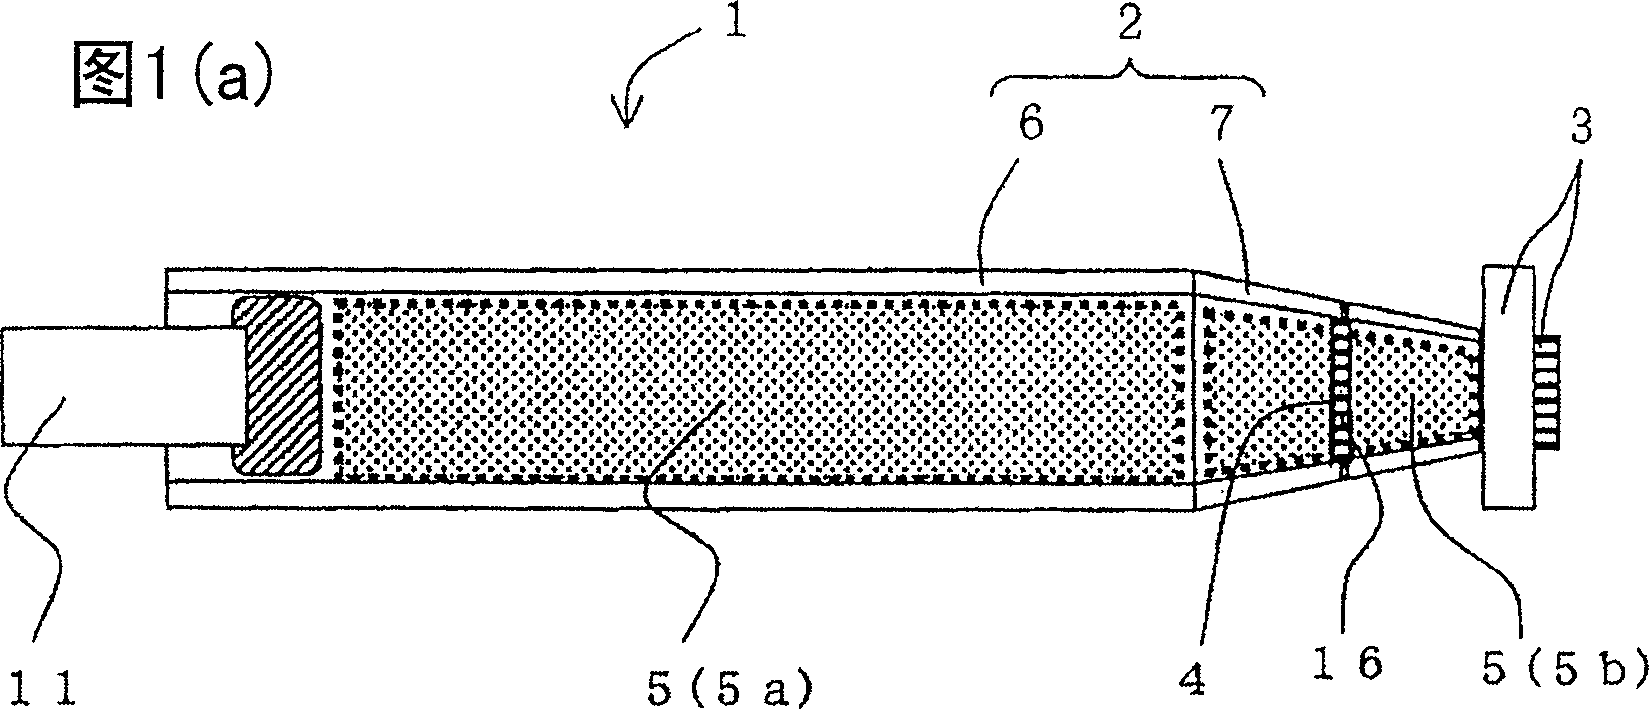 Method for manufacturing formed honeycomb structure